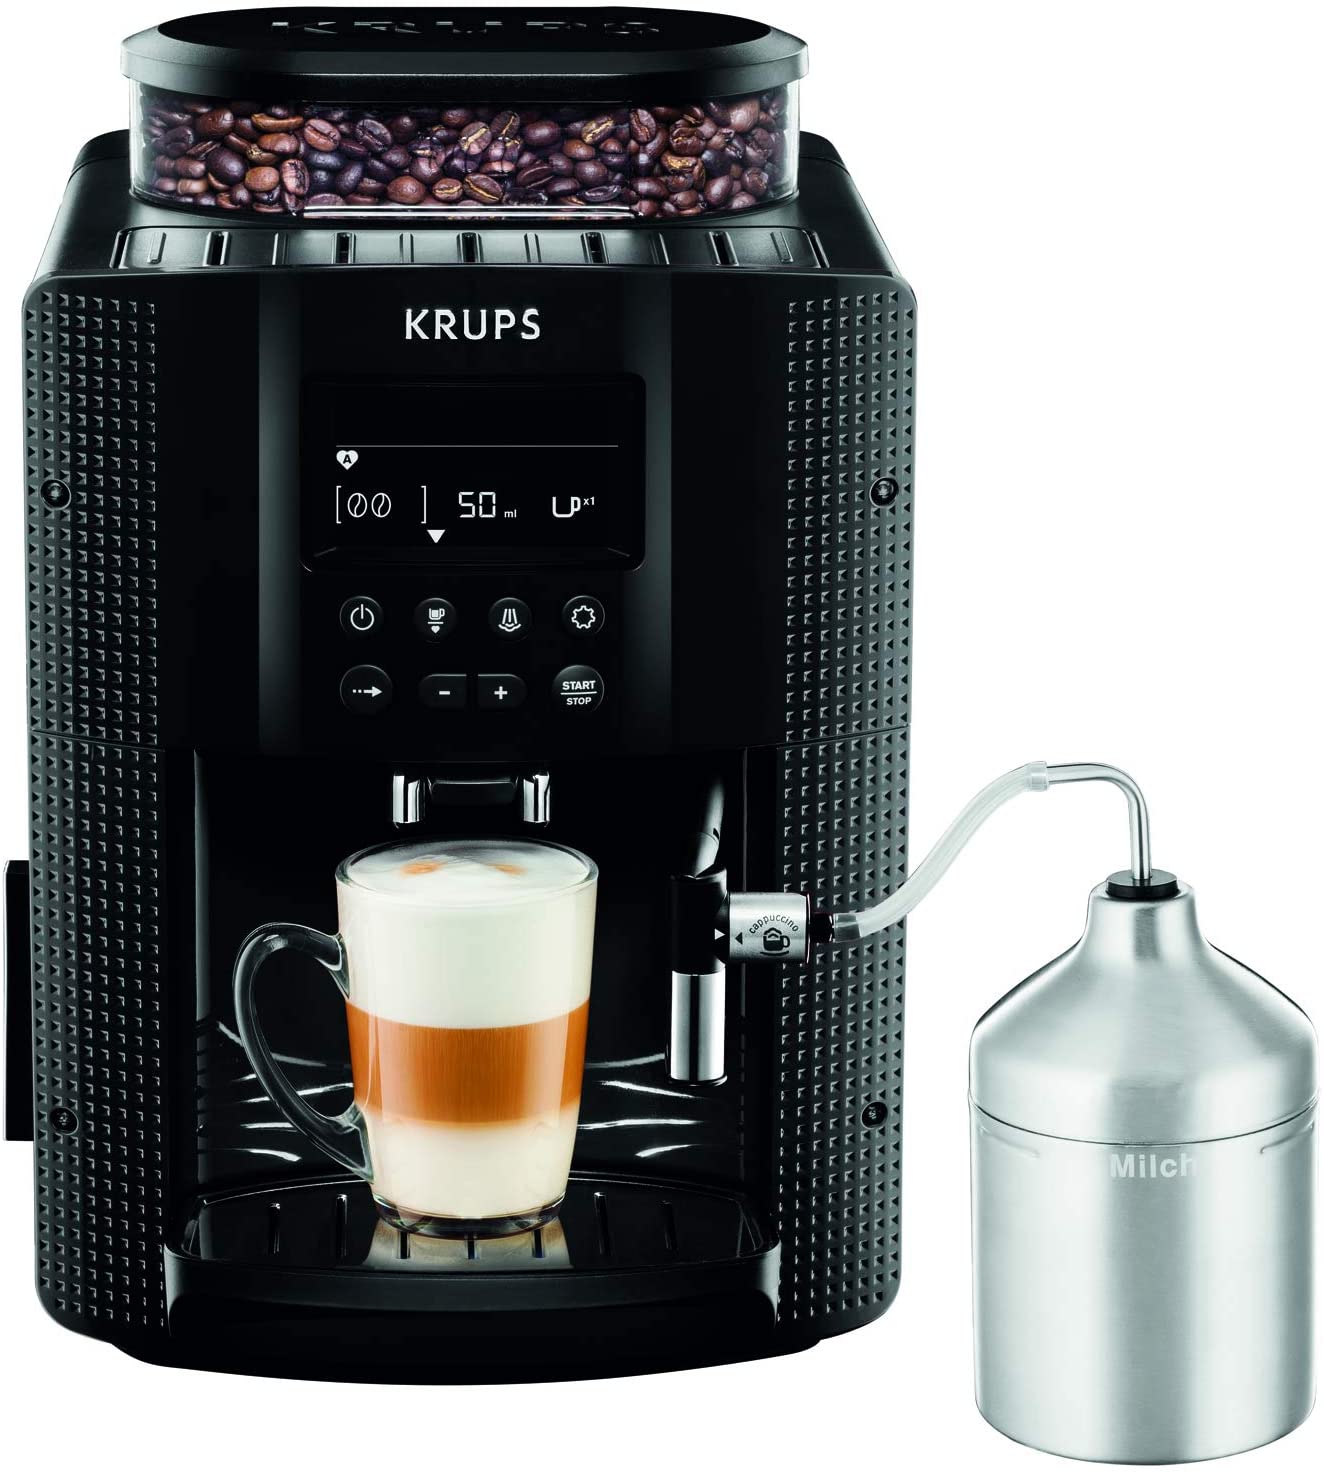 KRUPS Automatic Coffee Machine 1.8 l 15 bar, AutoCappuccino System, LC Display